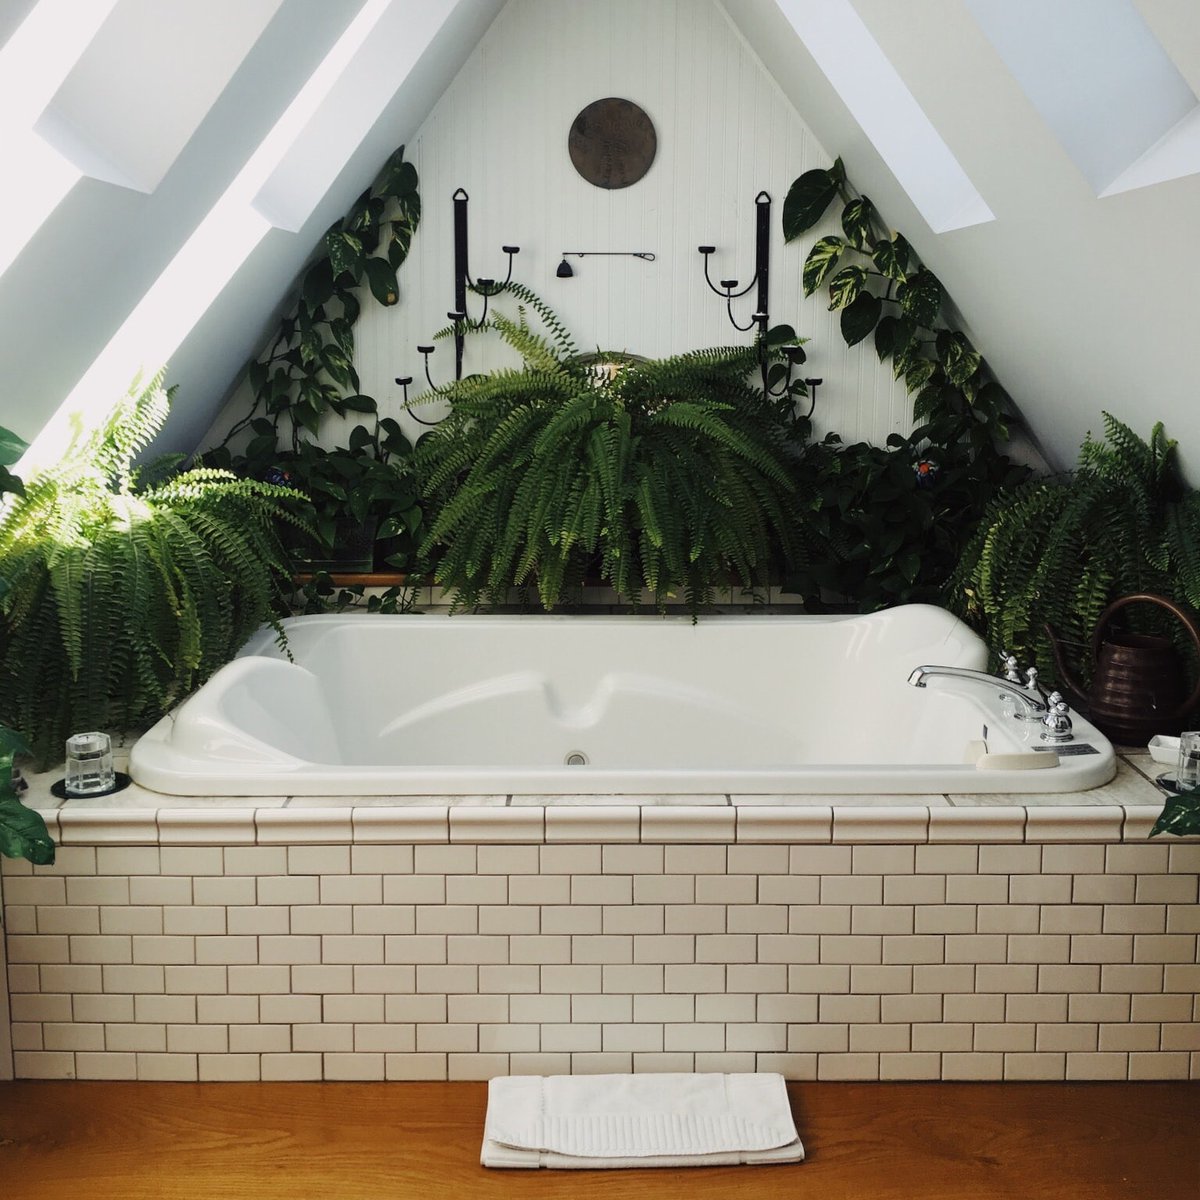 Is the greenery in this bathroom relaxing or overwhelming?

#remax #realtor #homes #fairfieldhomes #fairfield #realestate #homesforsale #remaxagent #fairfieldcounty #fairfieldca #fairfieldrealestate #fairfieldrealestateagent #spanishspeakingrealtor... facebook.com/78604295814058…